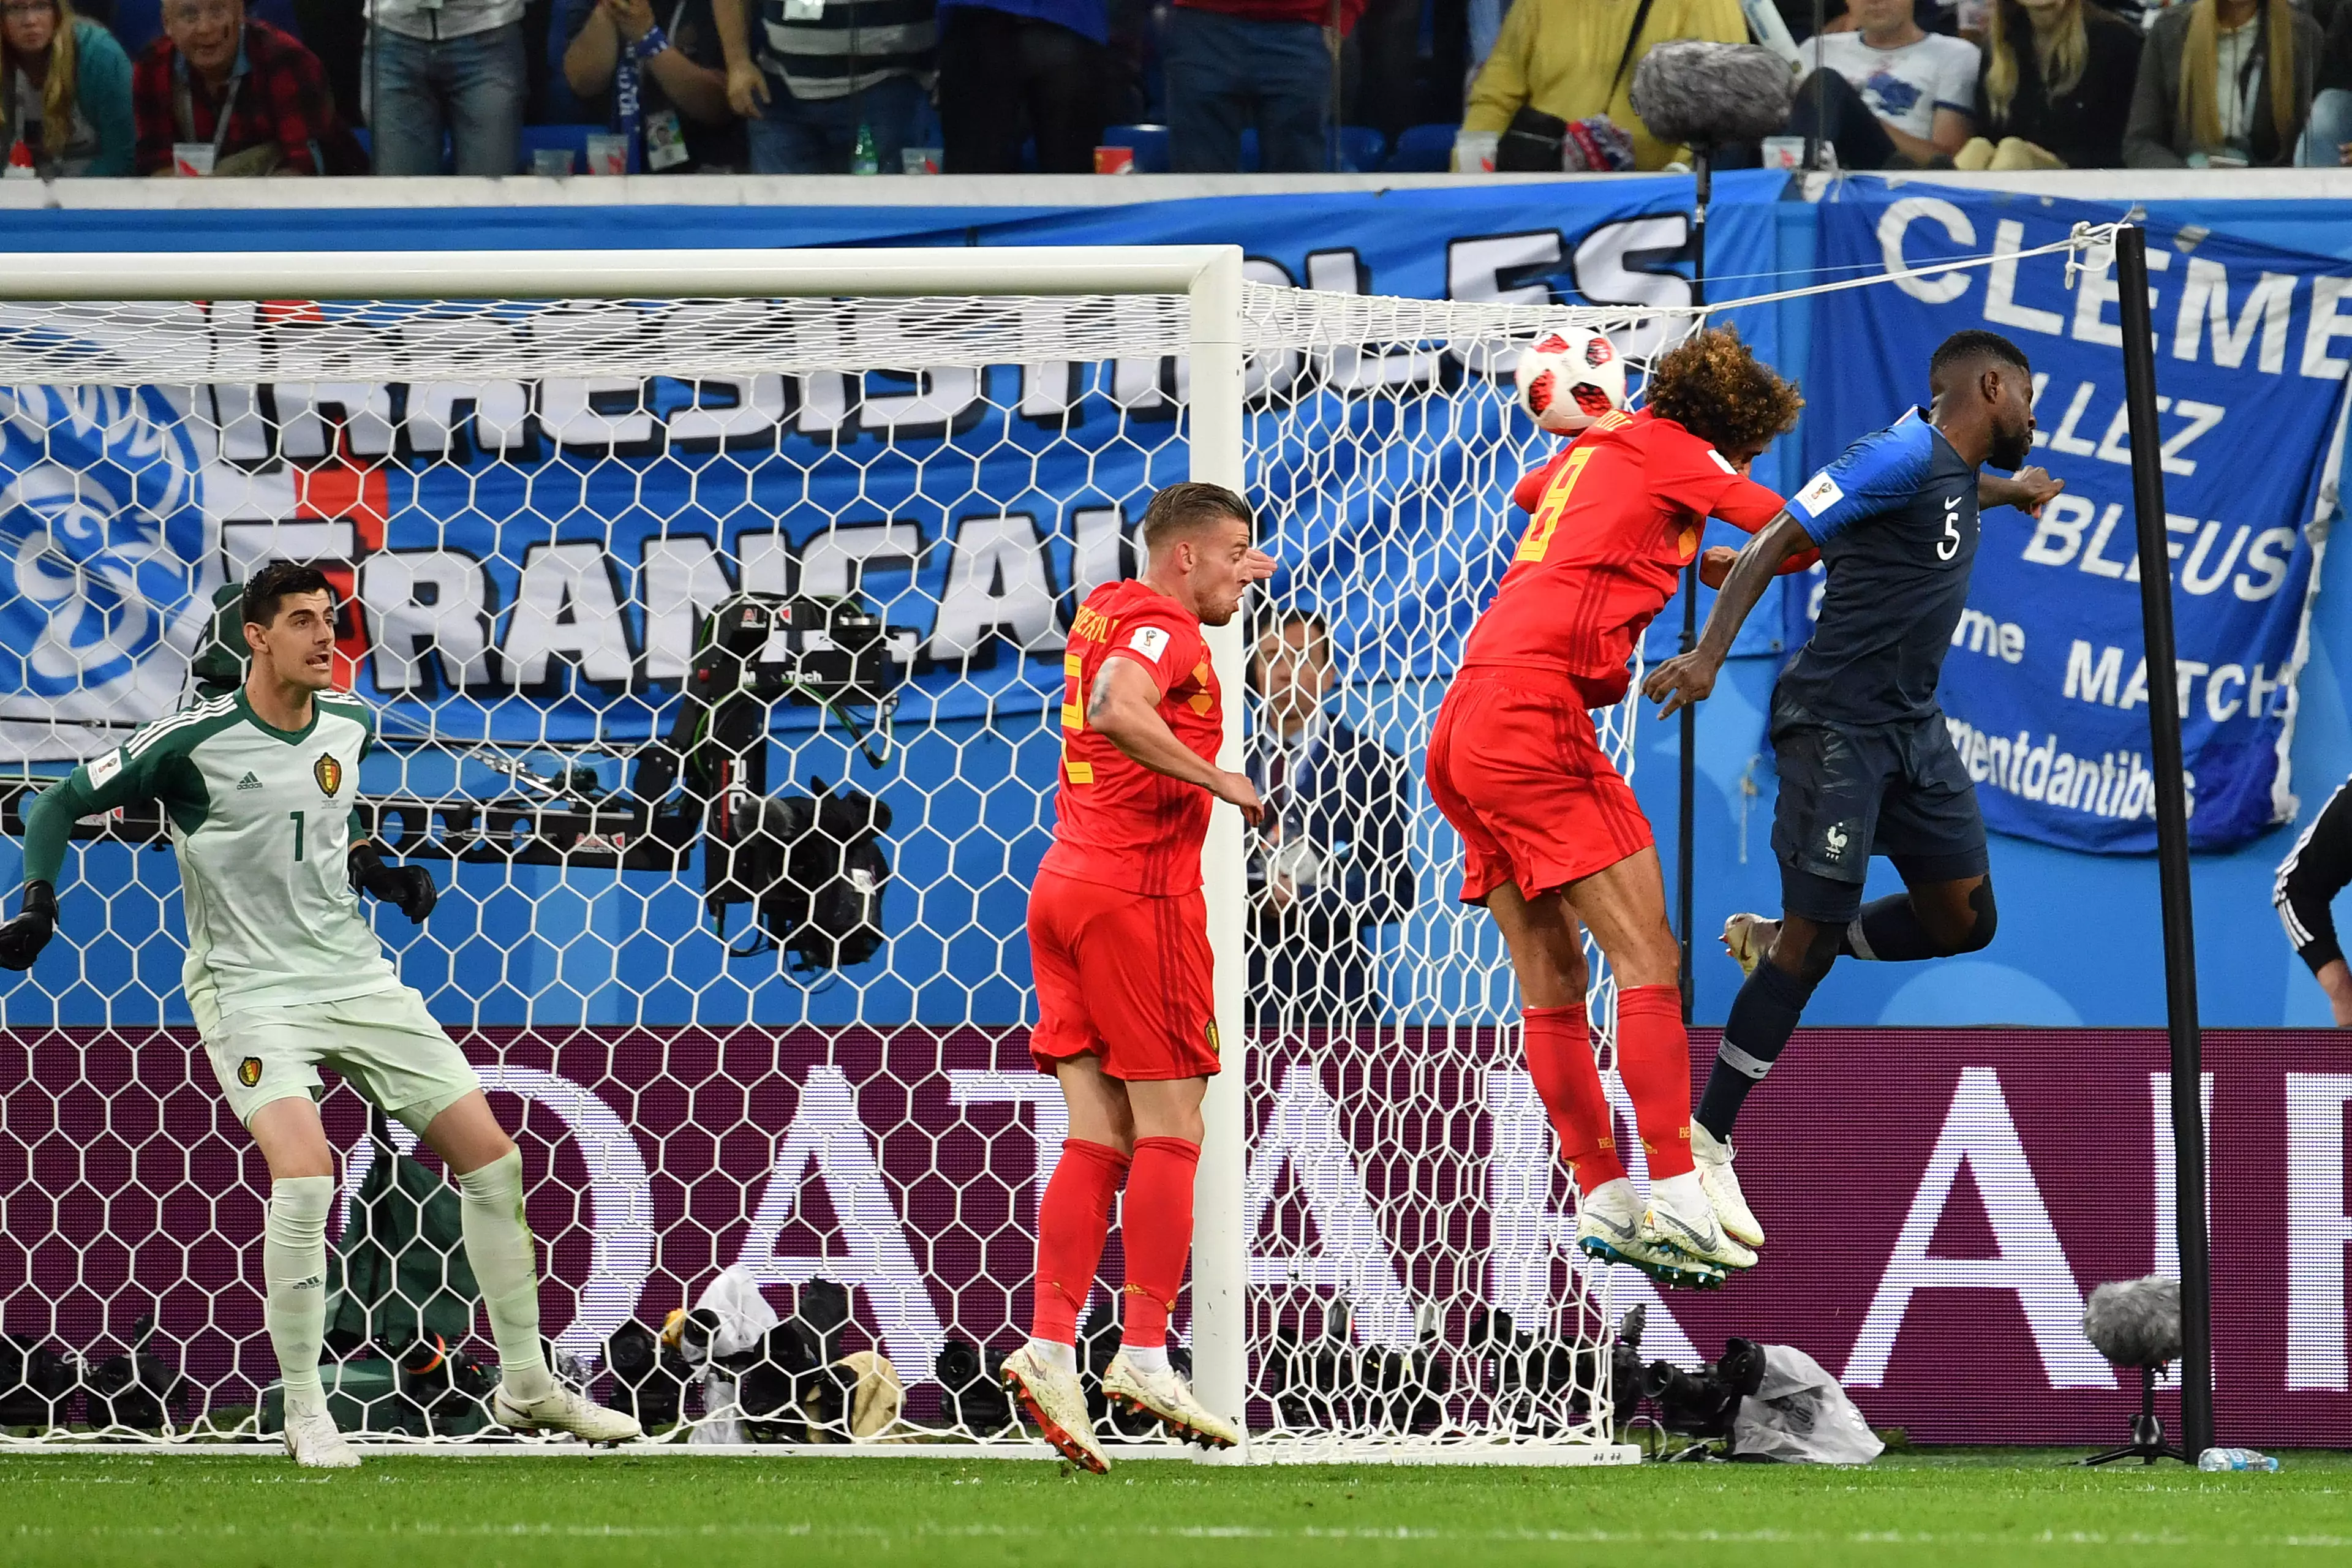 Umtiti nods his country into the World Cup final. Image: PA Images